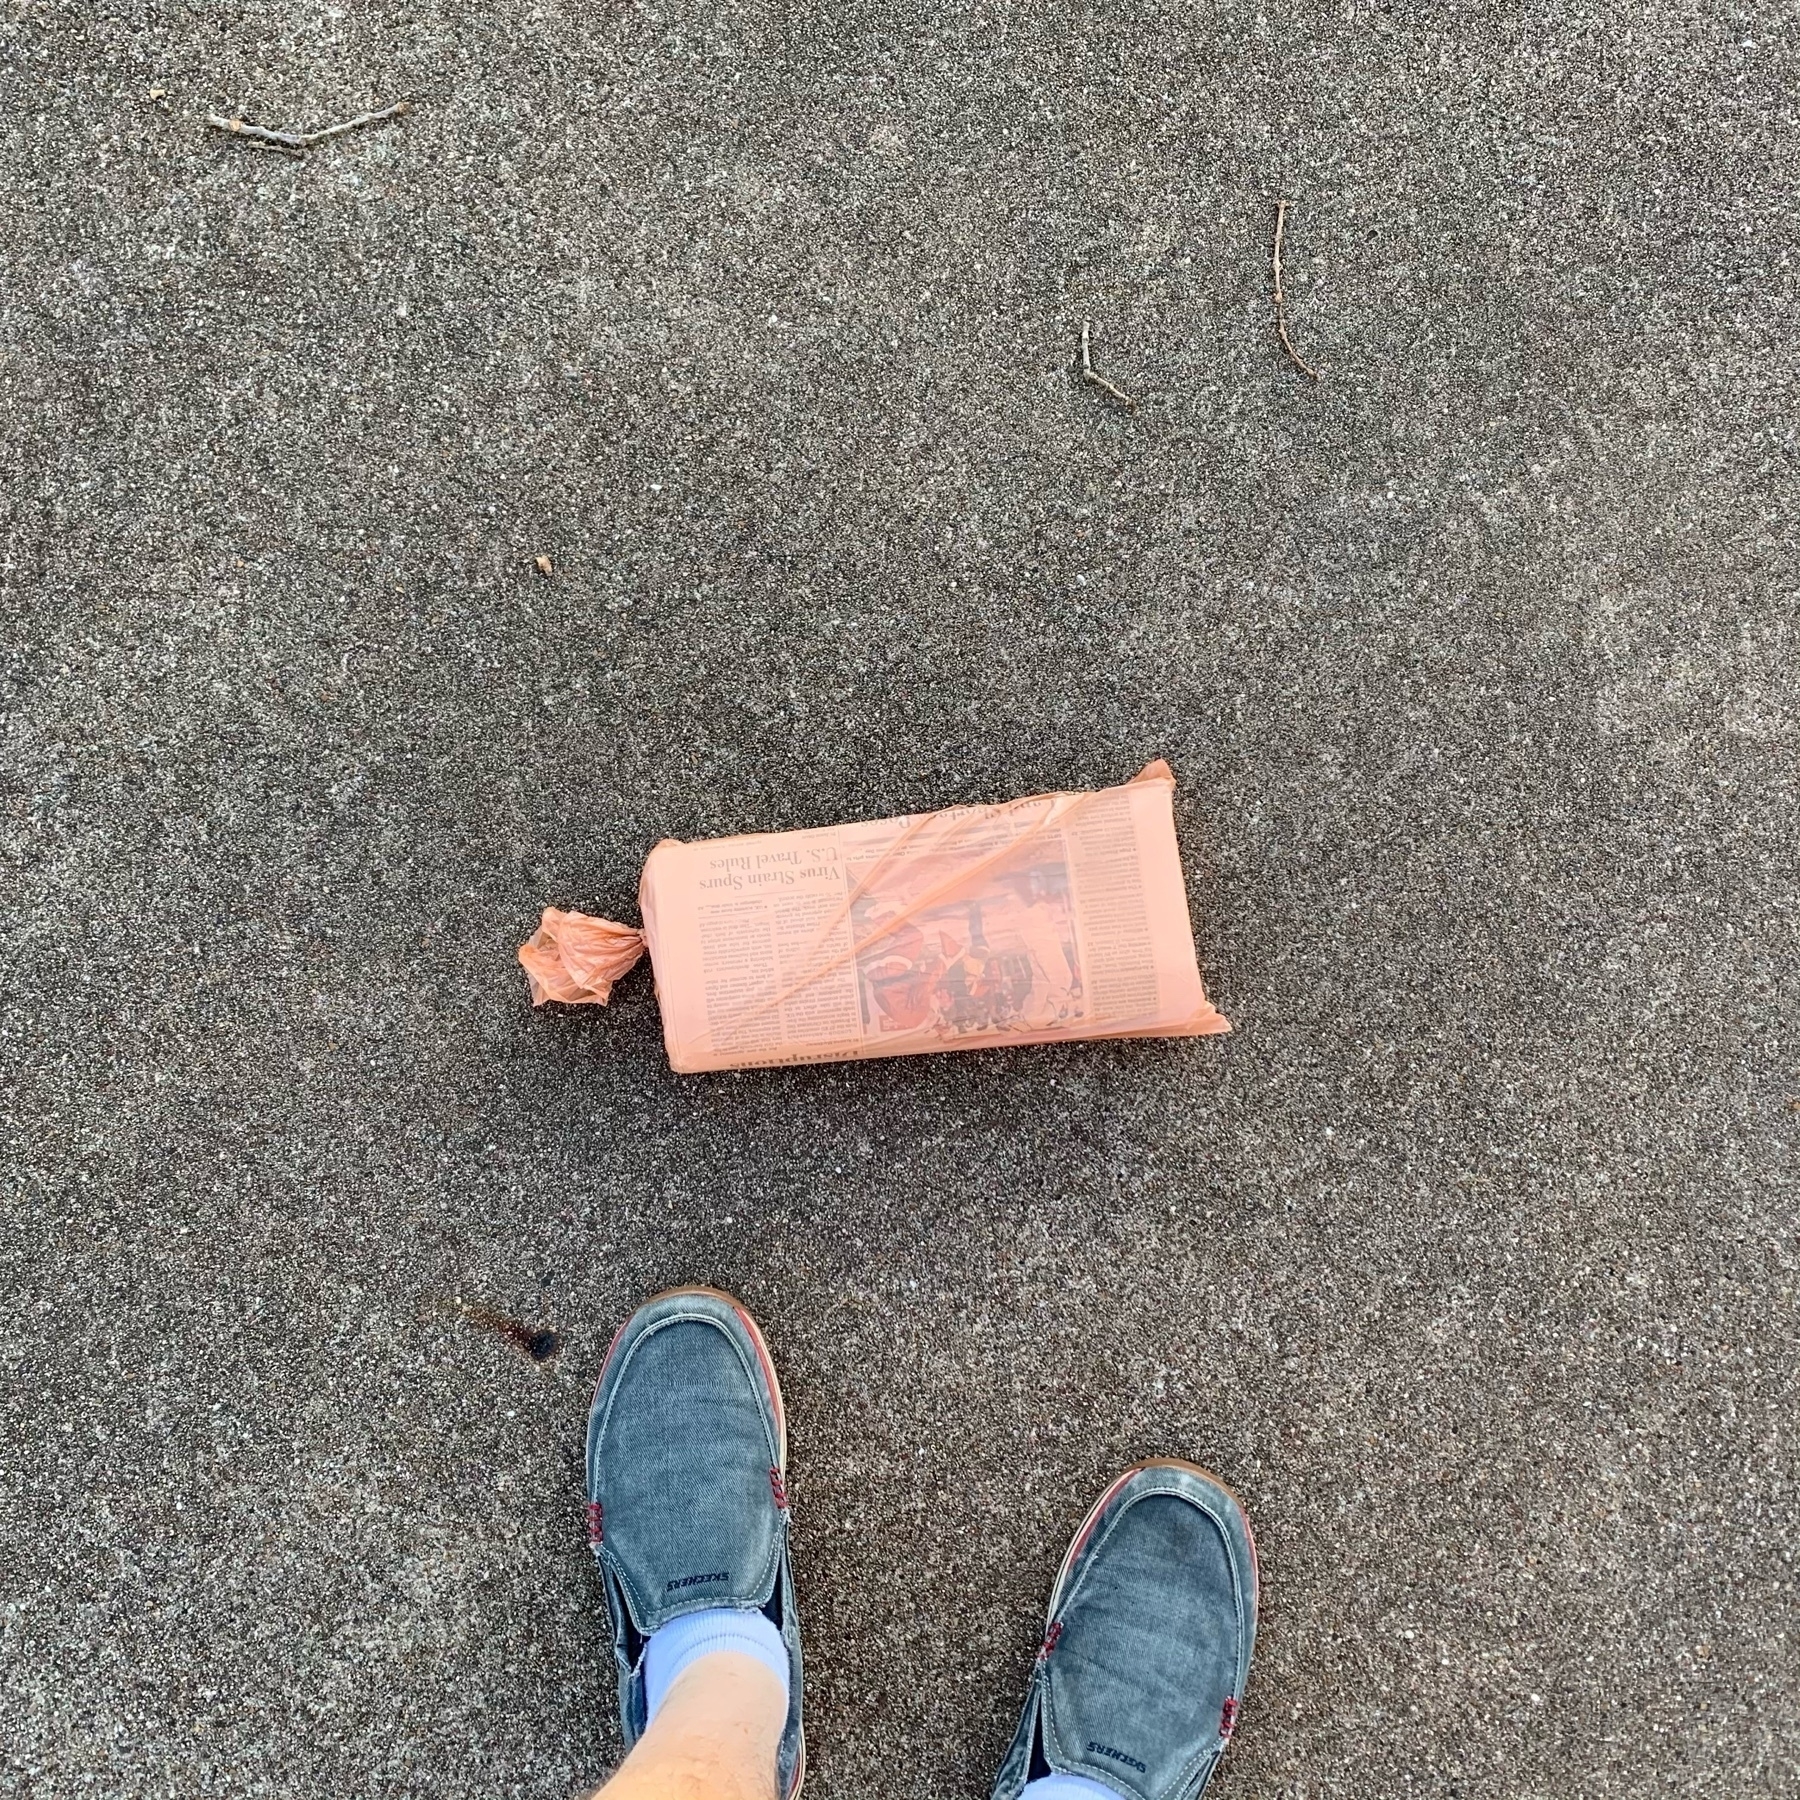 Newspaper delivered in driveway